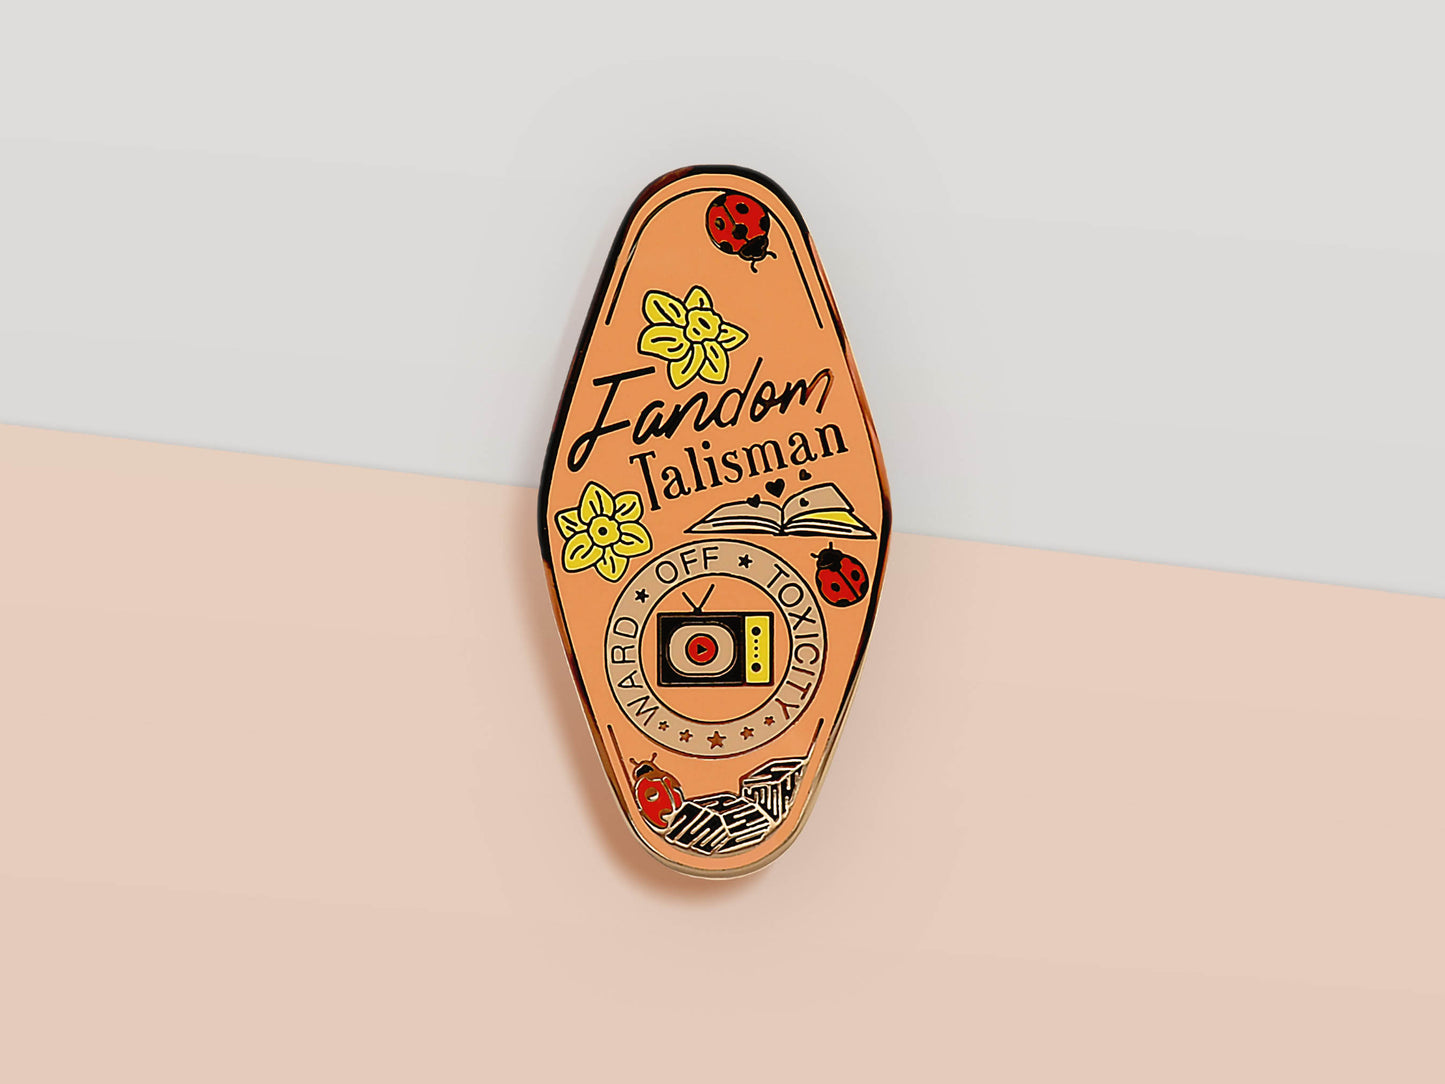 Gold Enamel Talisman Pin with pink design and the words Fandom Talisman, Ward of toxicity block. The pins design includes a television and an open book, ladybugs, as well as flowers and crystals.